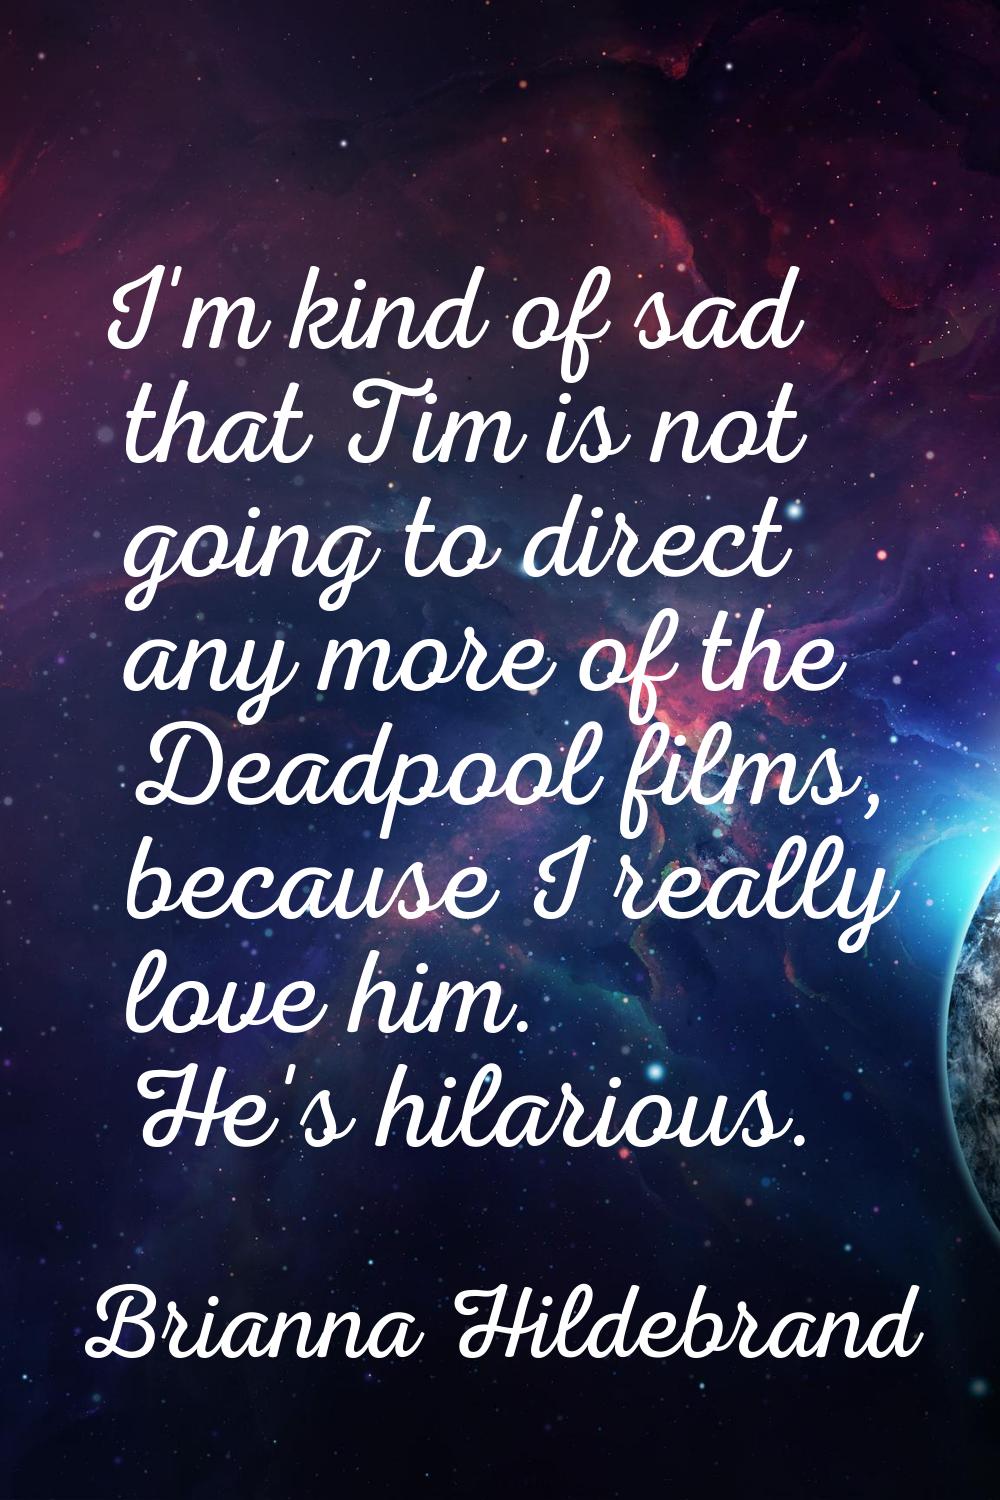 I'm kind of sad that Tim is not going to direct any more of the Deadpool films, because I really lo